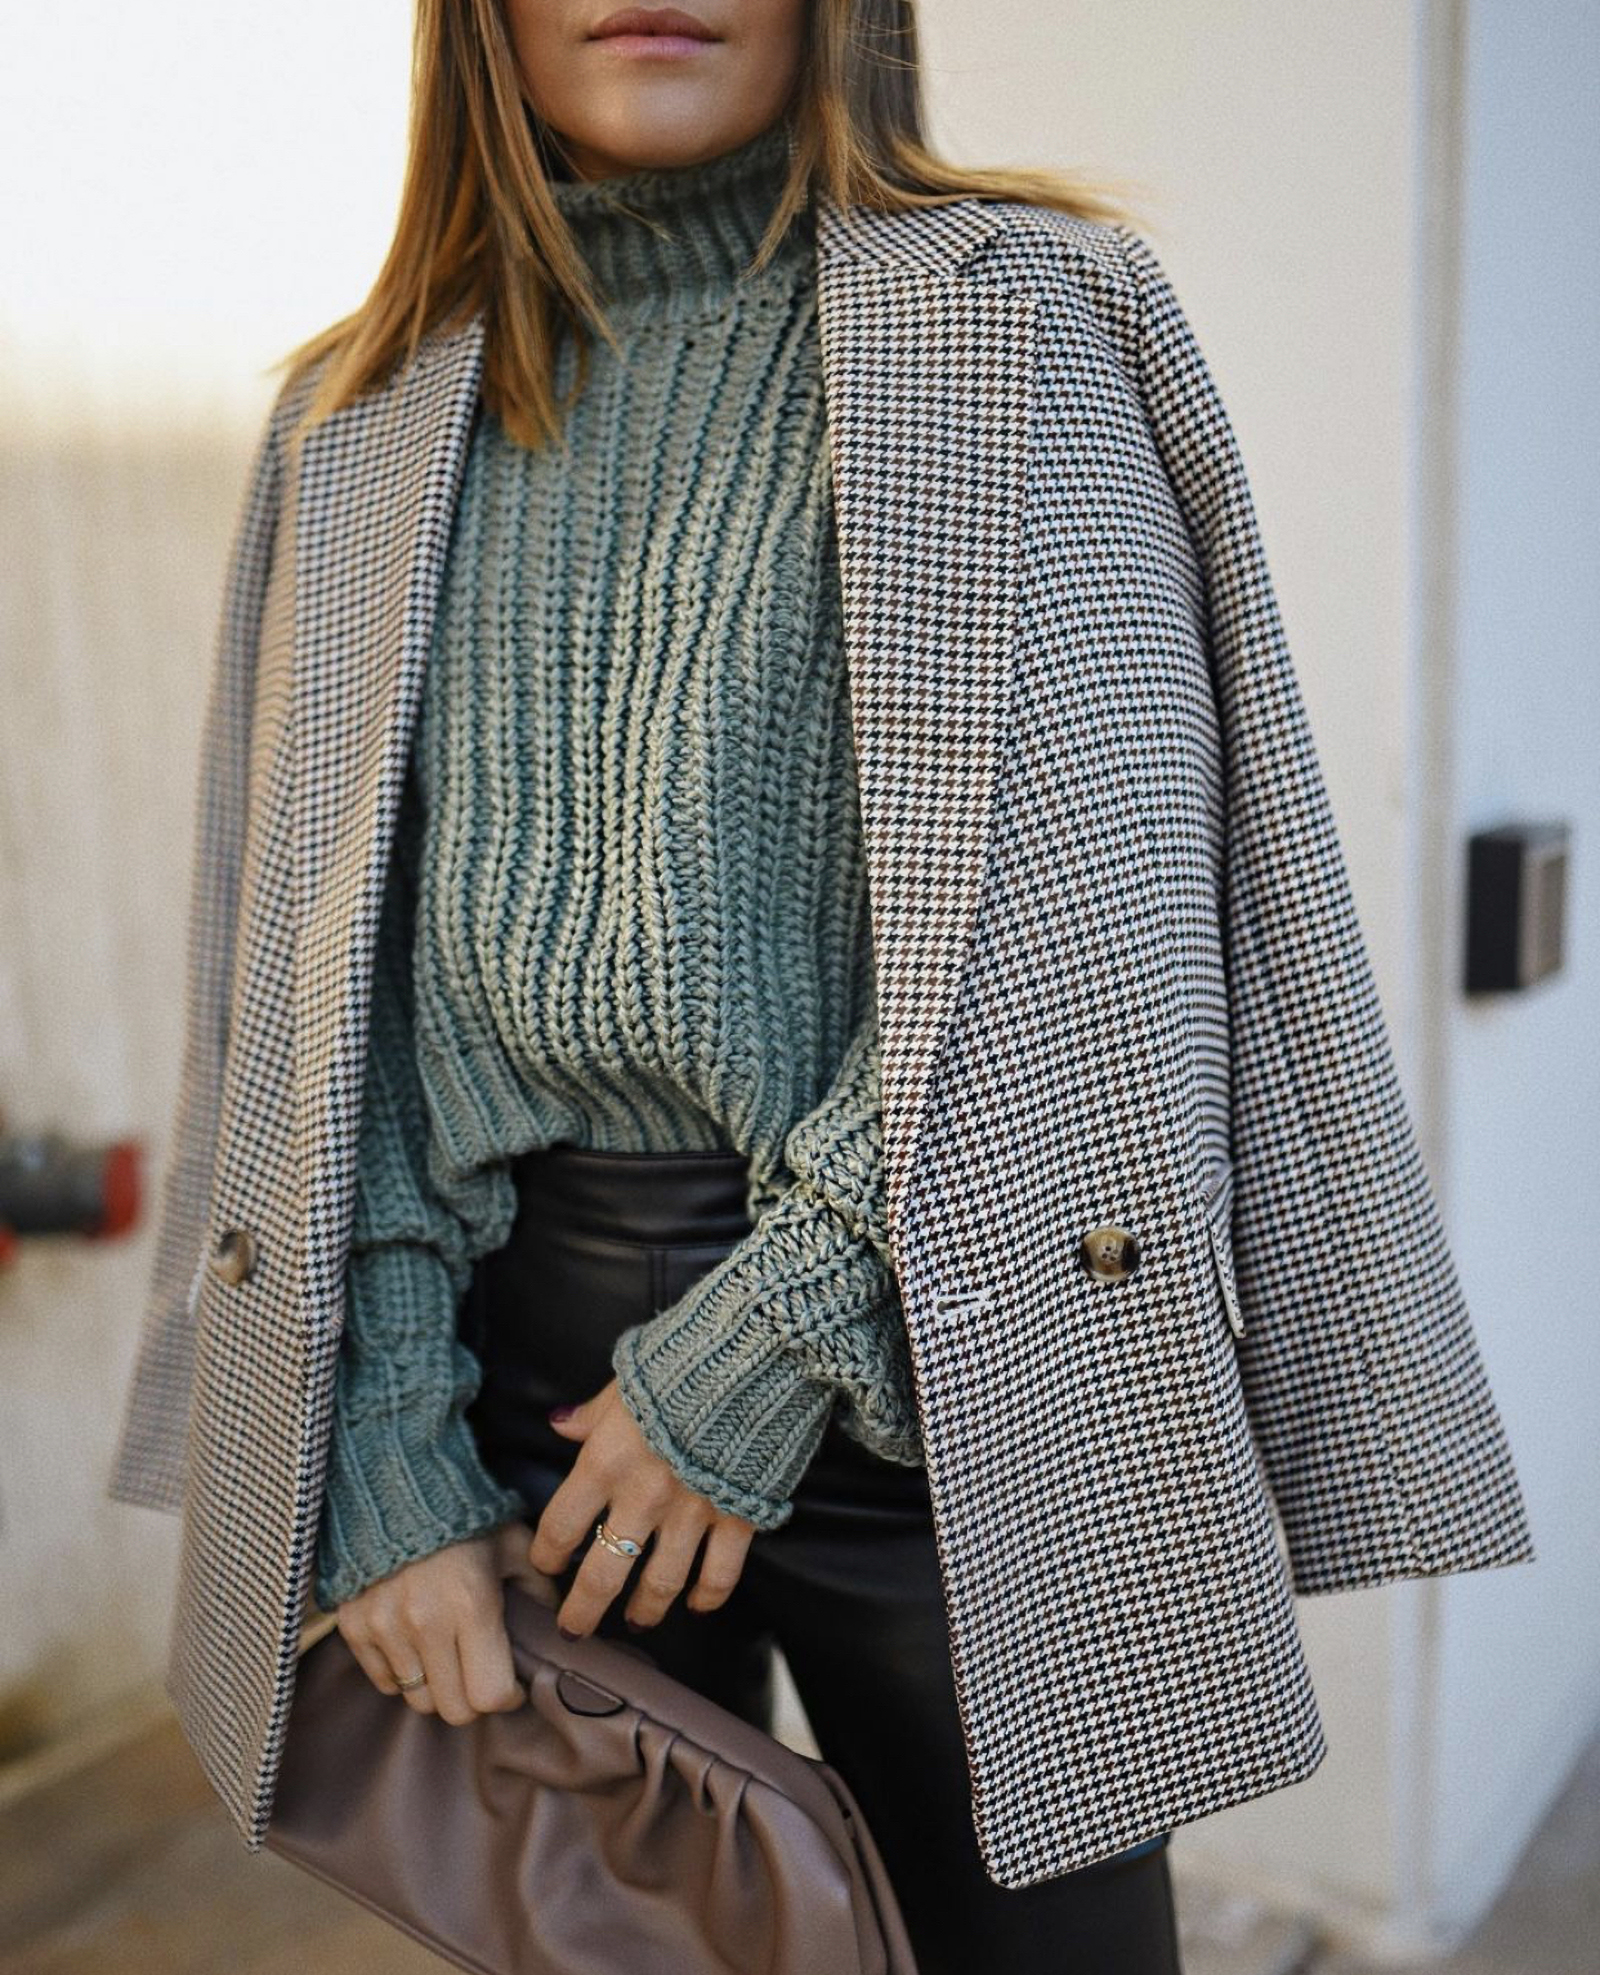 CAROLINA HELLAL FROM CHIC TALK WEARING A SAGE GREEN SWEATER AND PLAID BLACK AND WHITE BLAZER